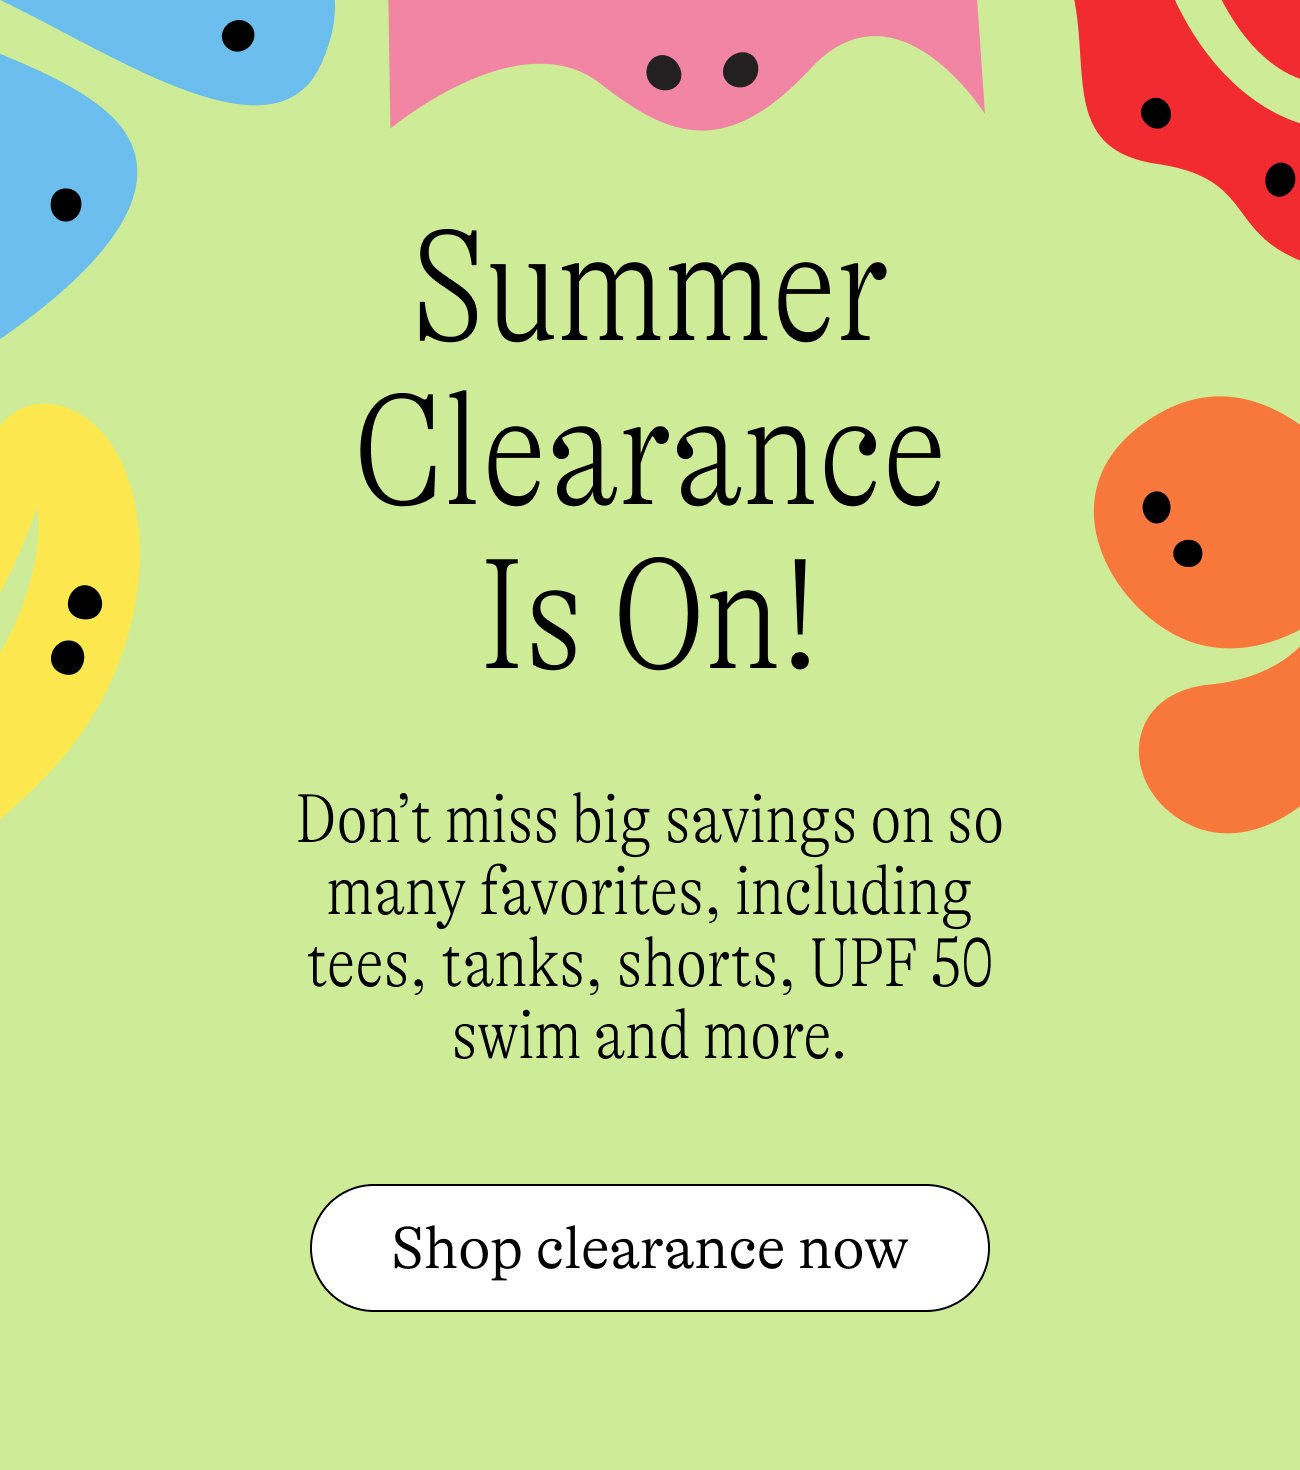 Summer Clearance Is On! Don’t miss big savings on so many favorites, including tees, tanks, shorts, UPF 50 swim and more.